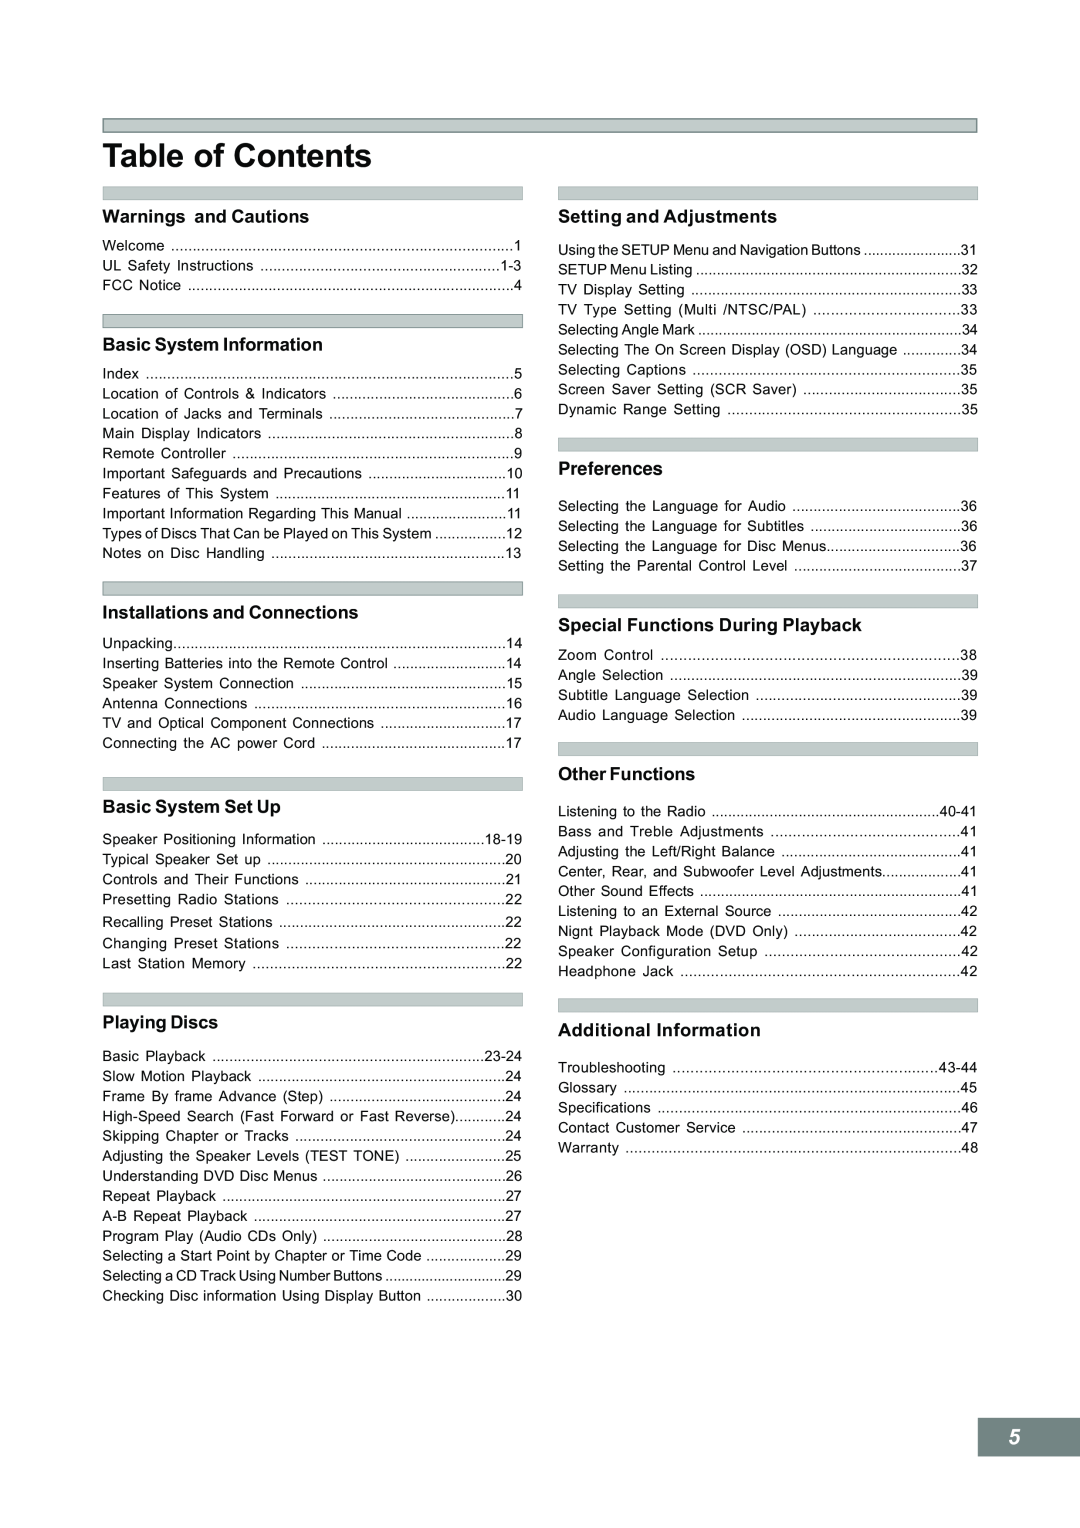 Emerson AV101 manual Table of Contents, Preferences 